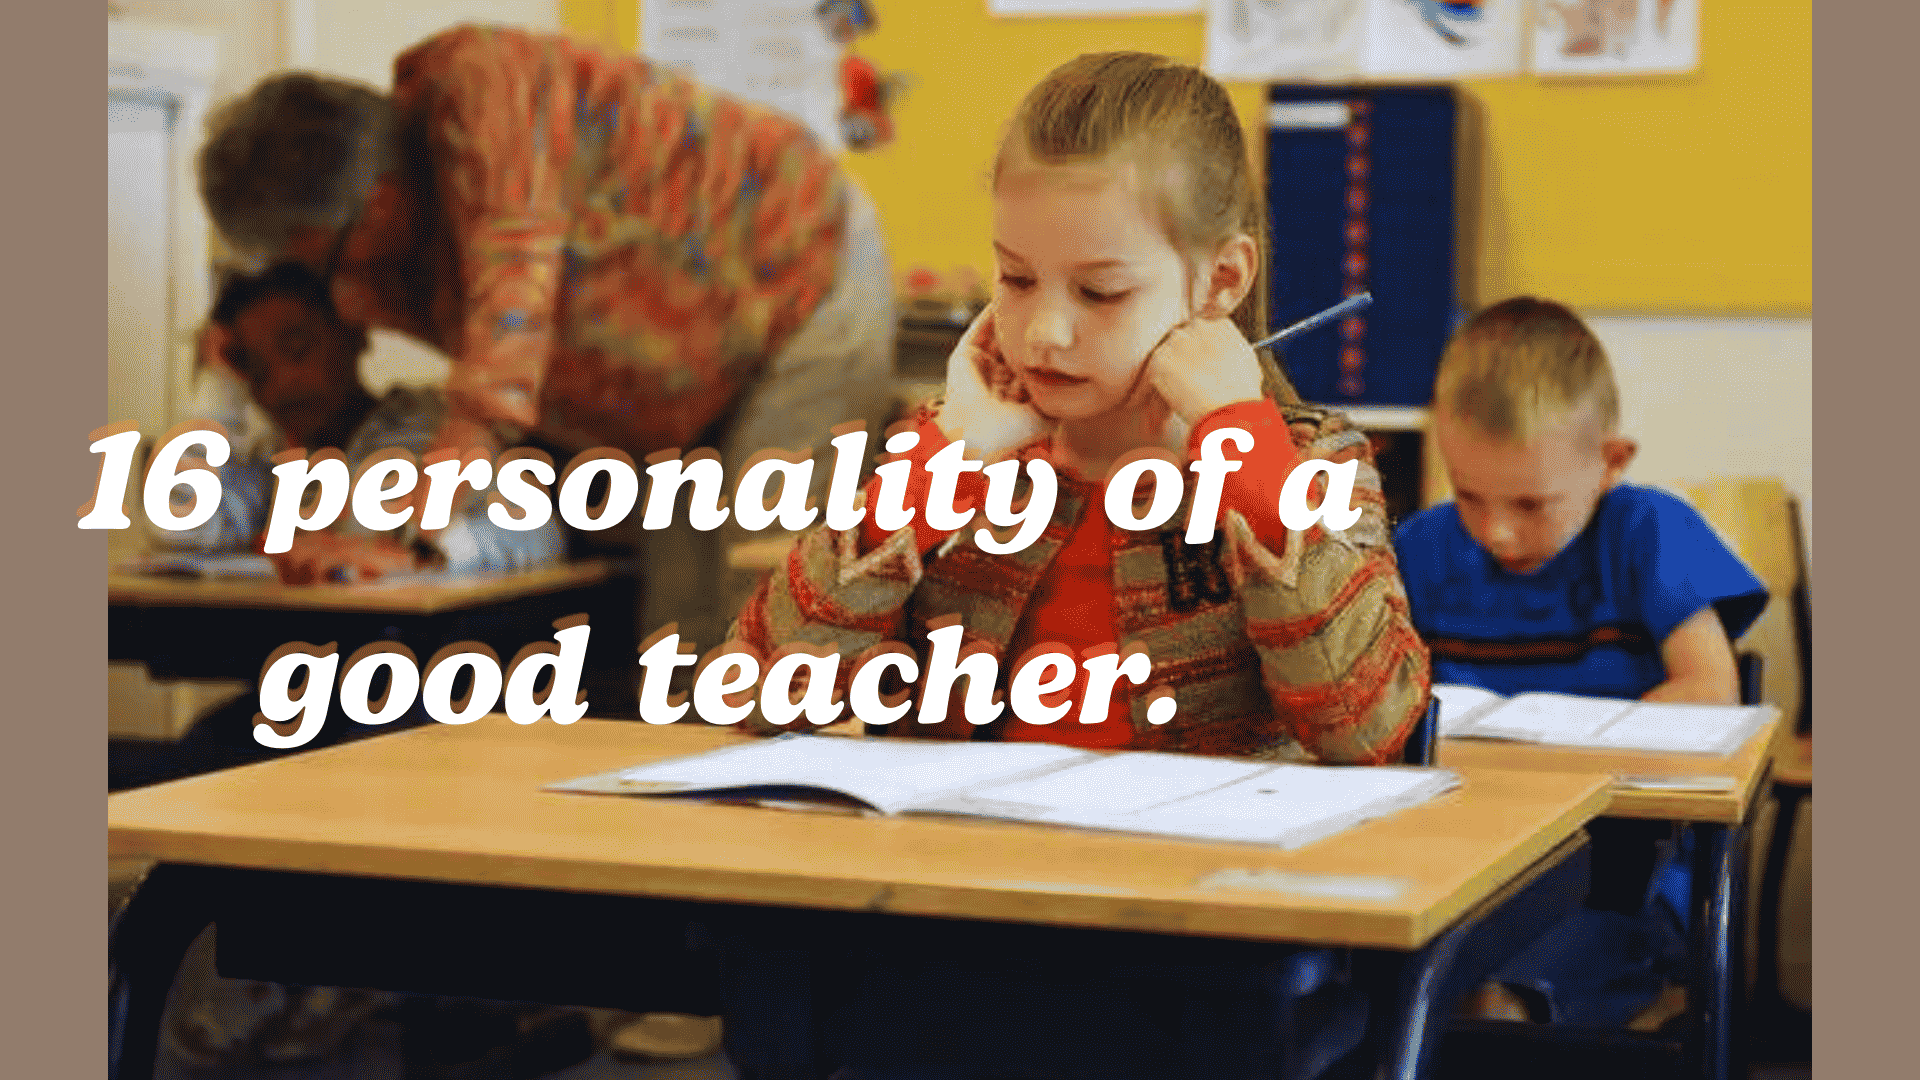 16 personality of a good teacher.